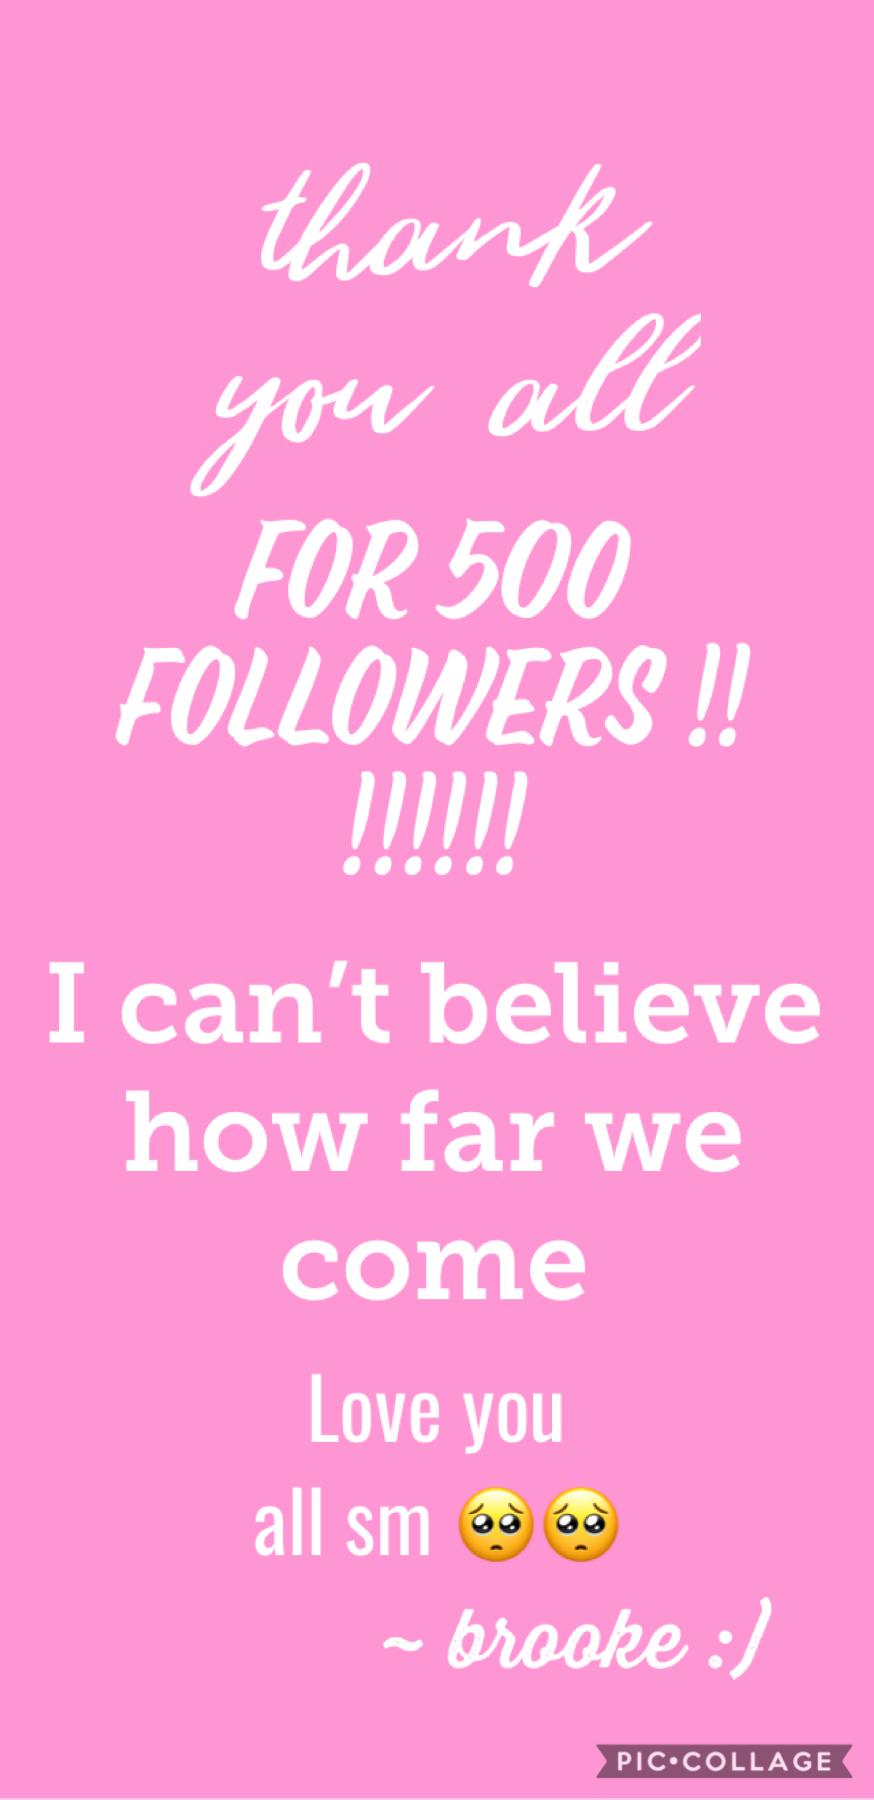 thank u all sm for 500 followers !! u guys are the sweetest :) xoxo 